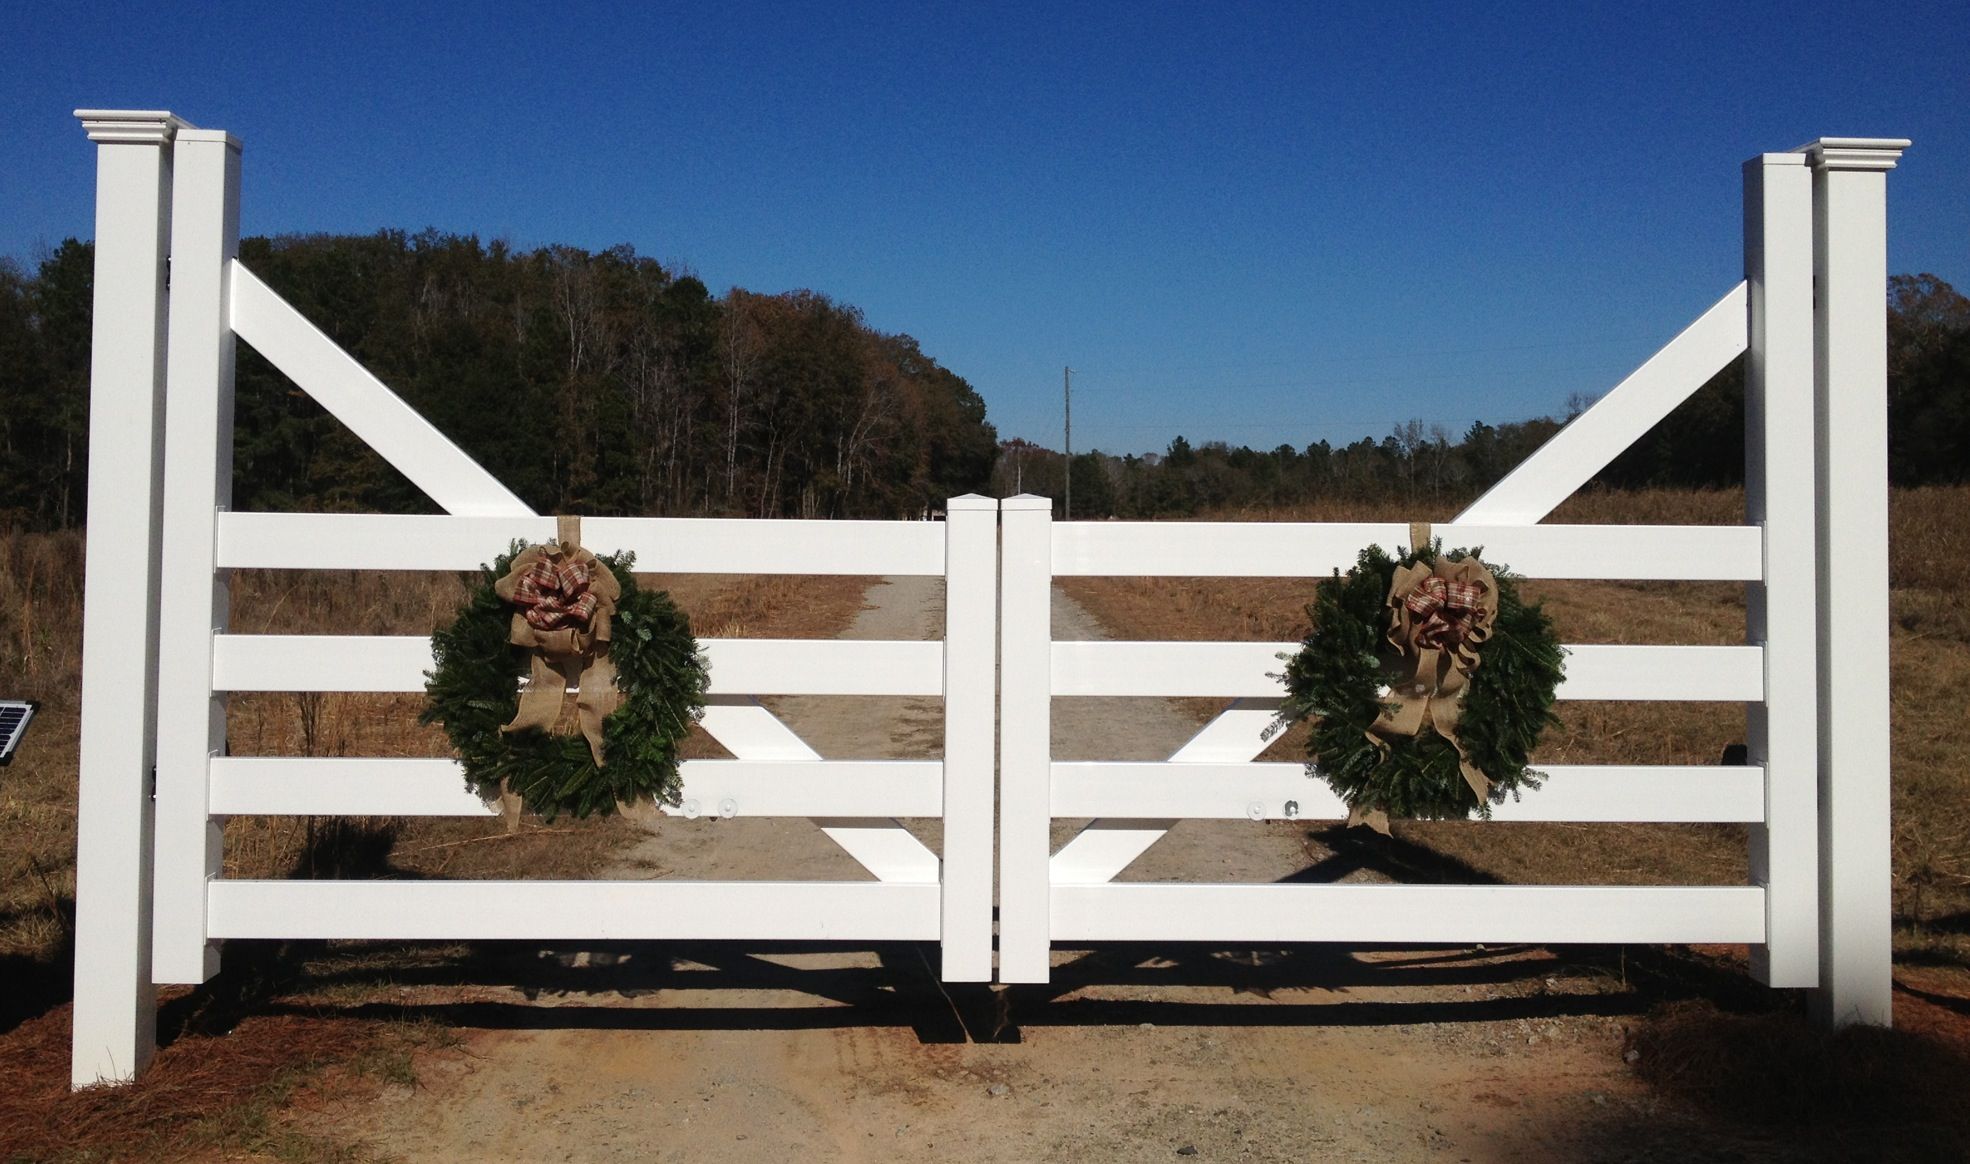 Farm Gate Designs: Enhance Your Property with Stylish and Functional Farm Gate Designs